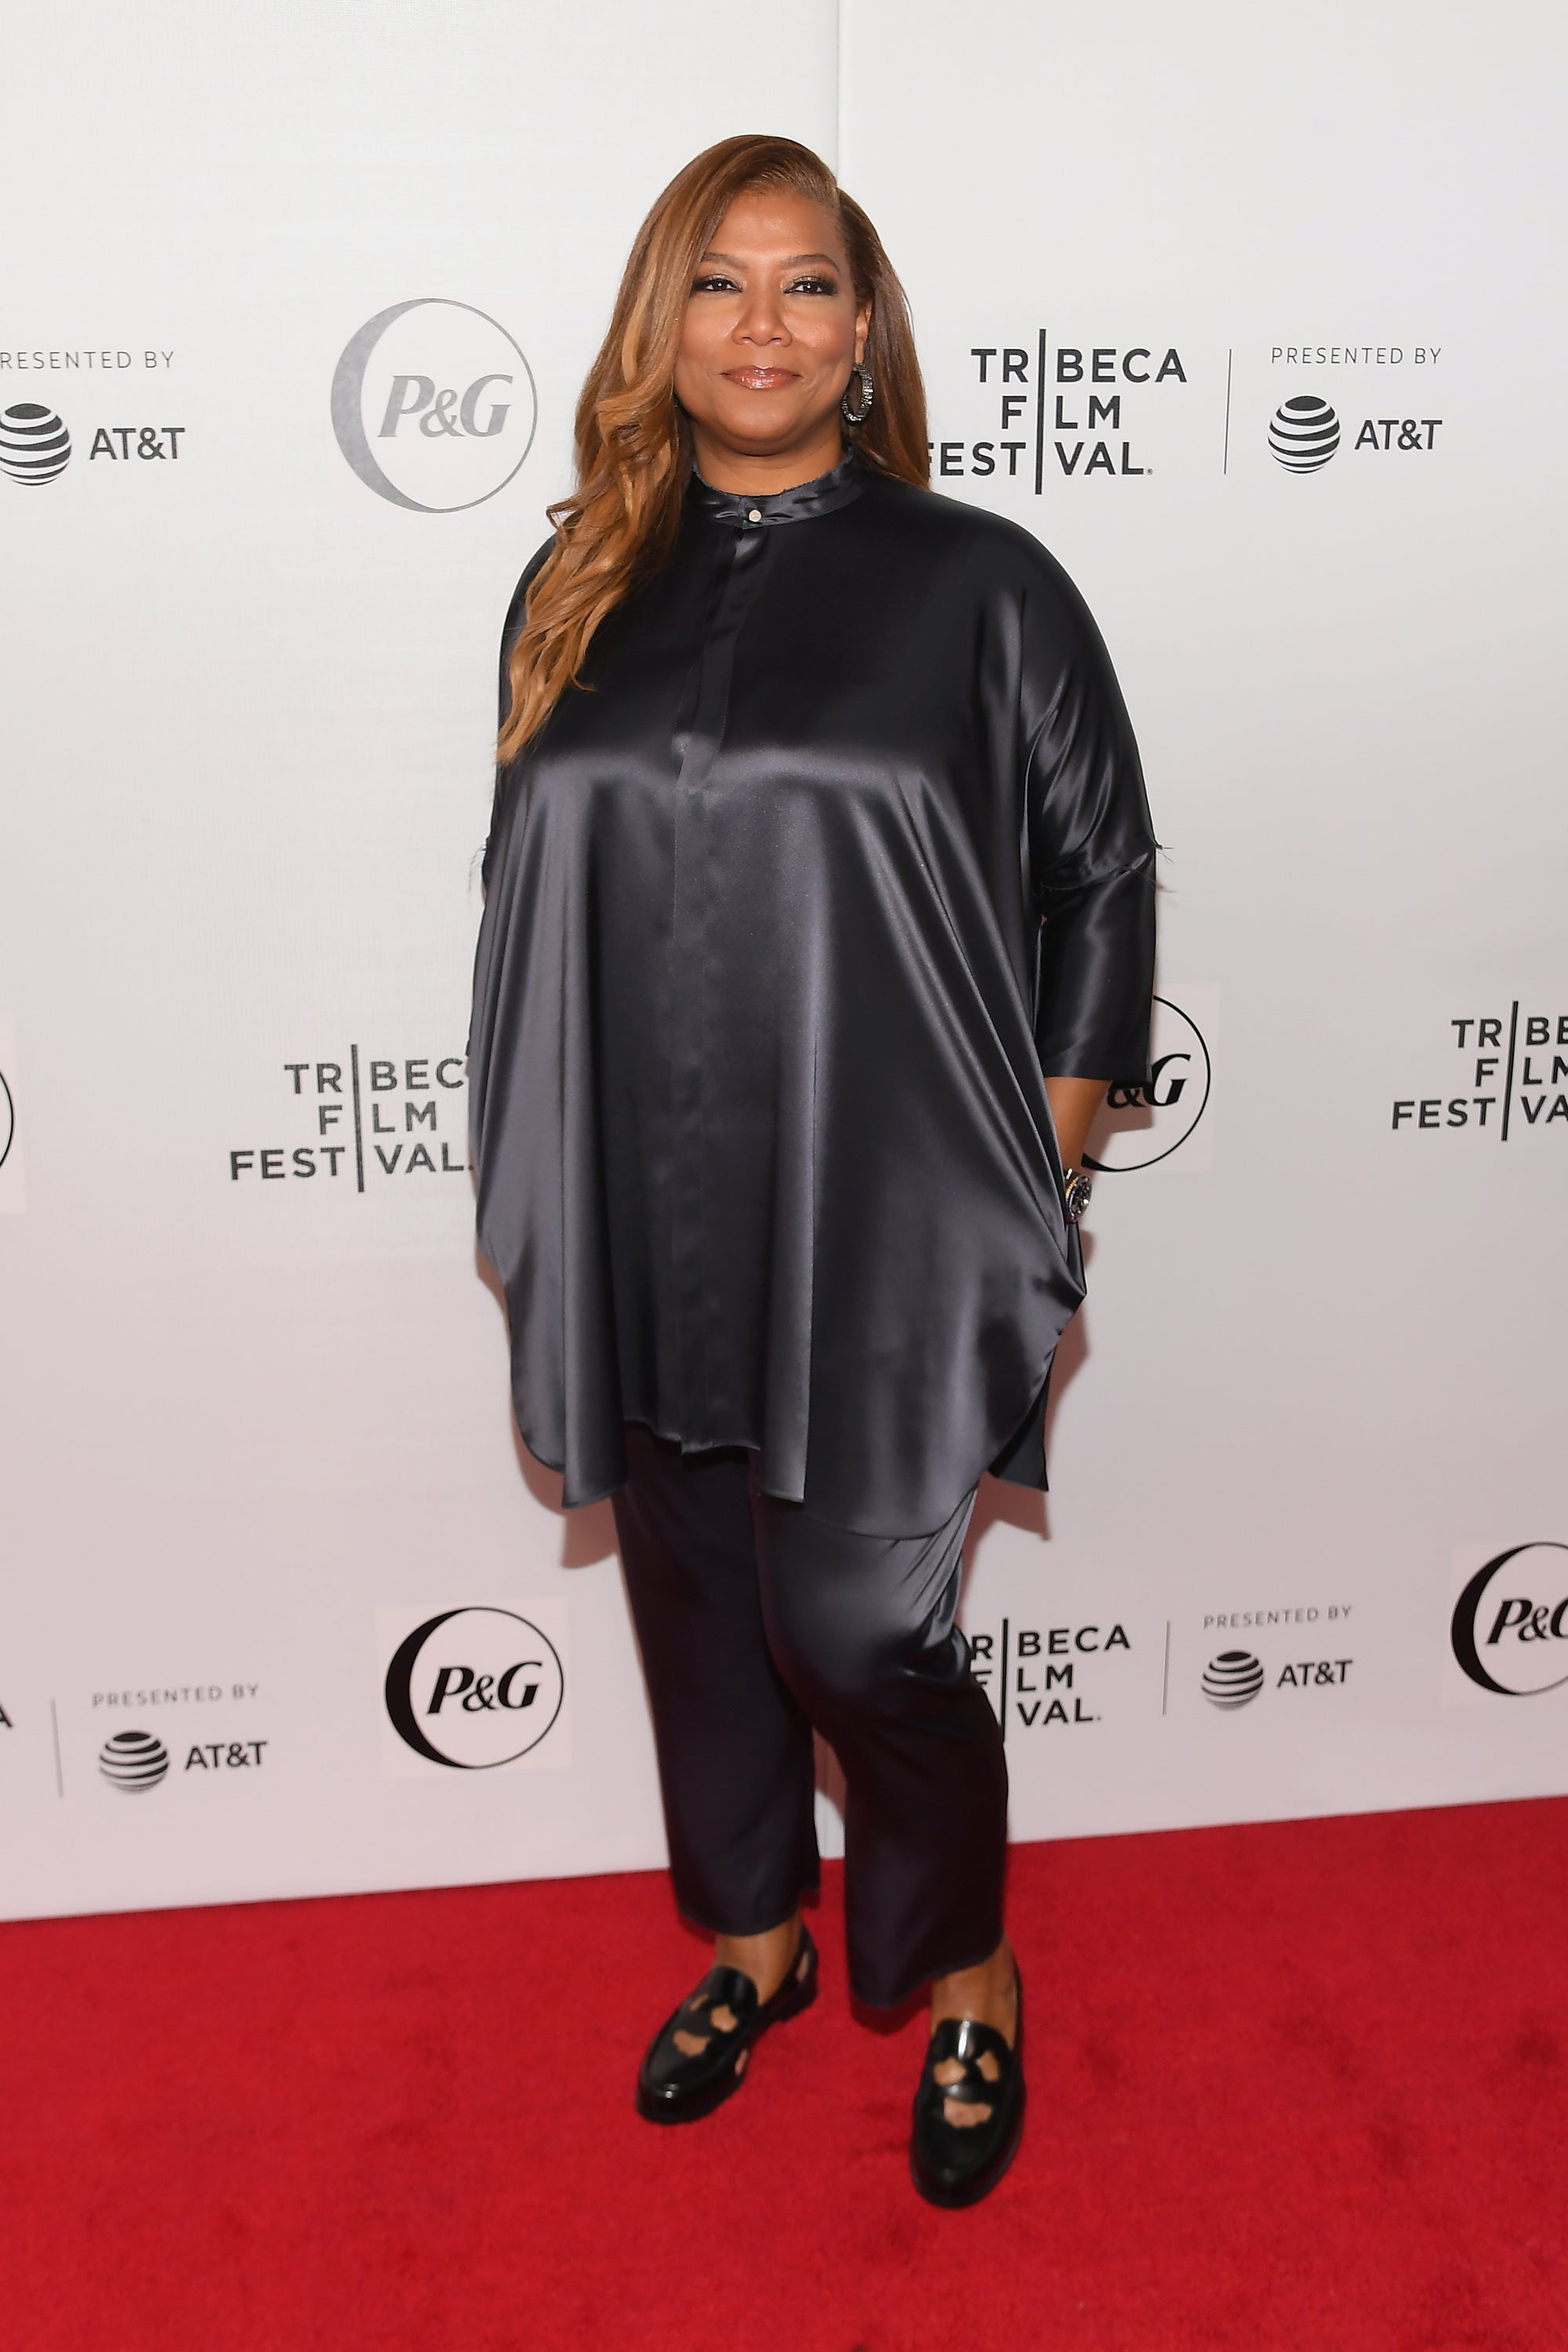 Marj J Blige, Lil' Kim, Angela Bassett, And More Celebs Out And About